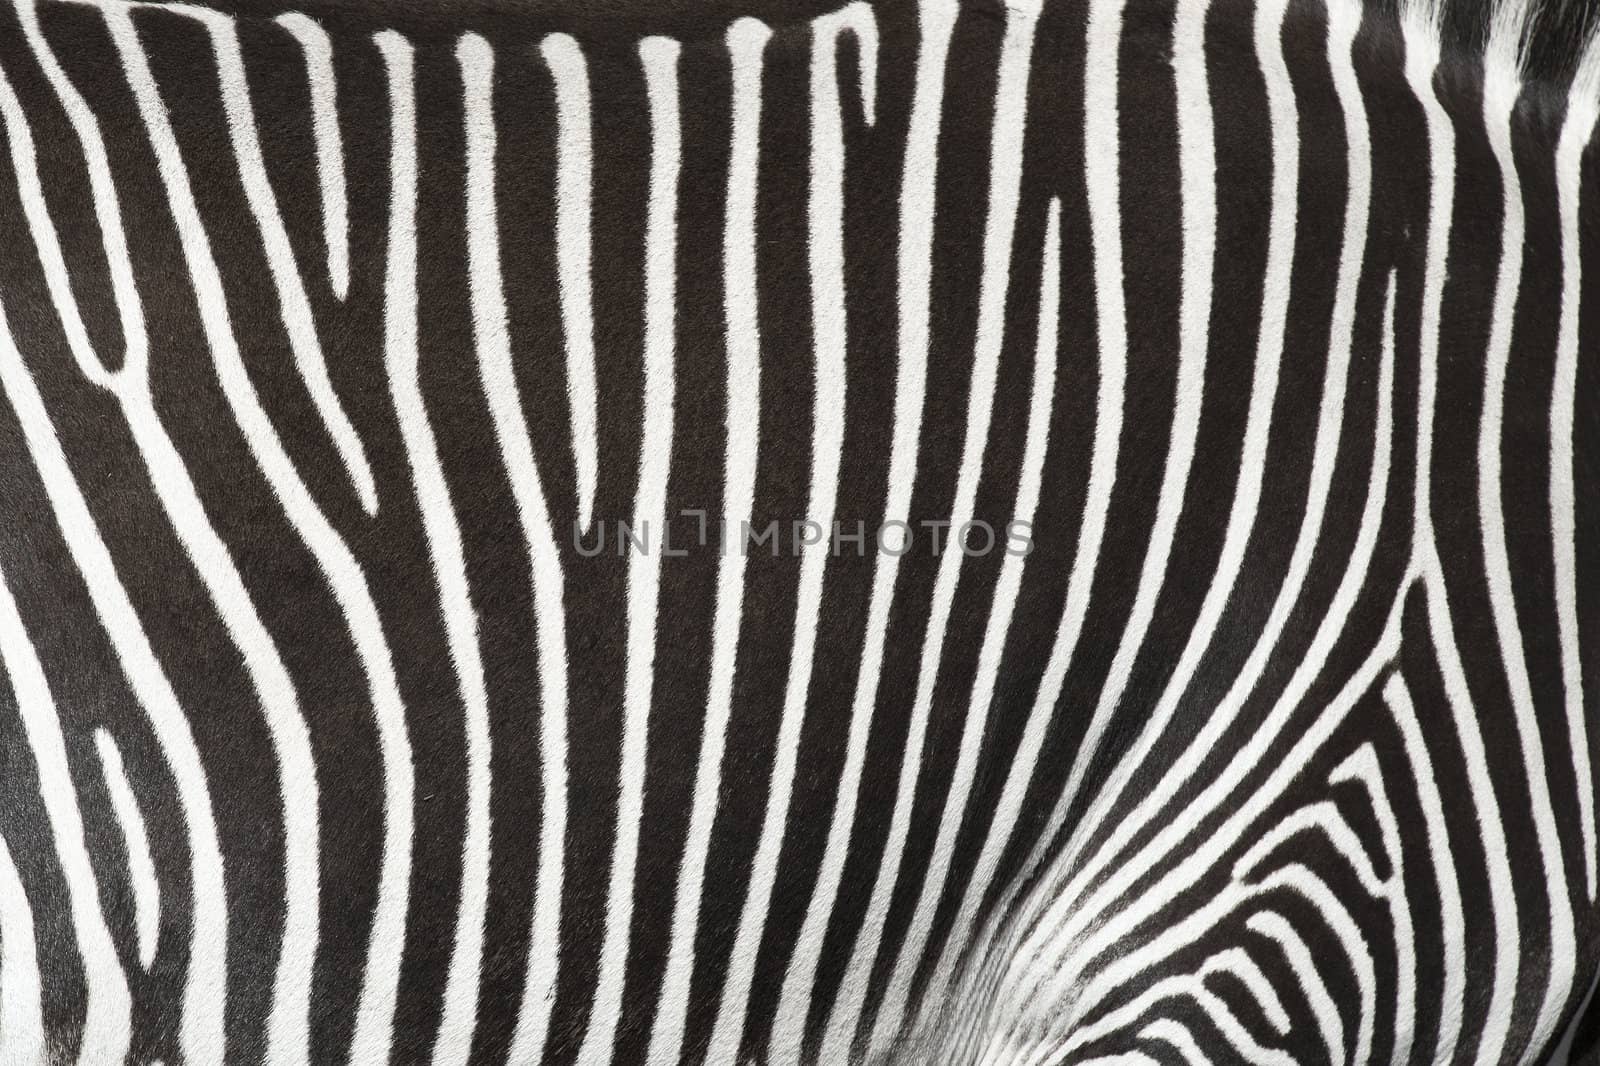 Texture of the skin of a zebra. by angelsimon